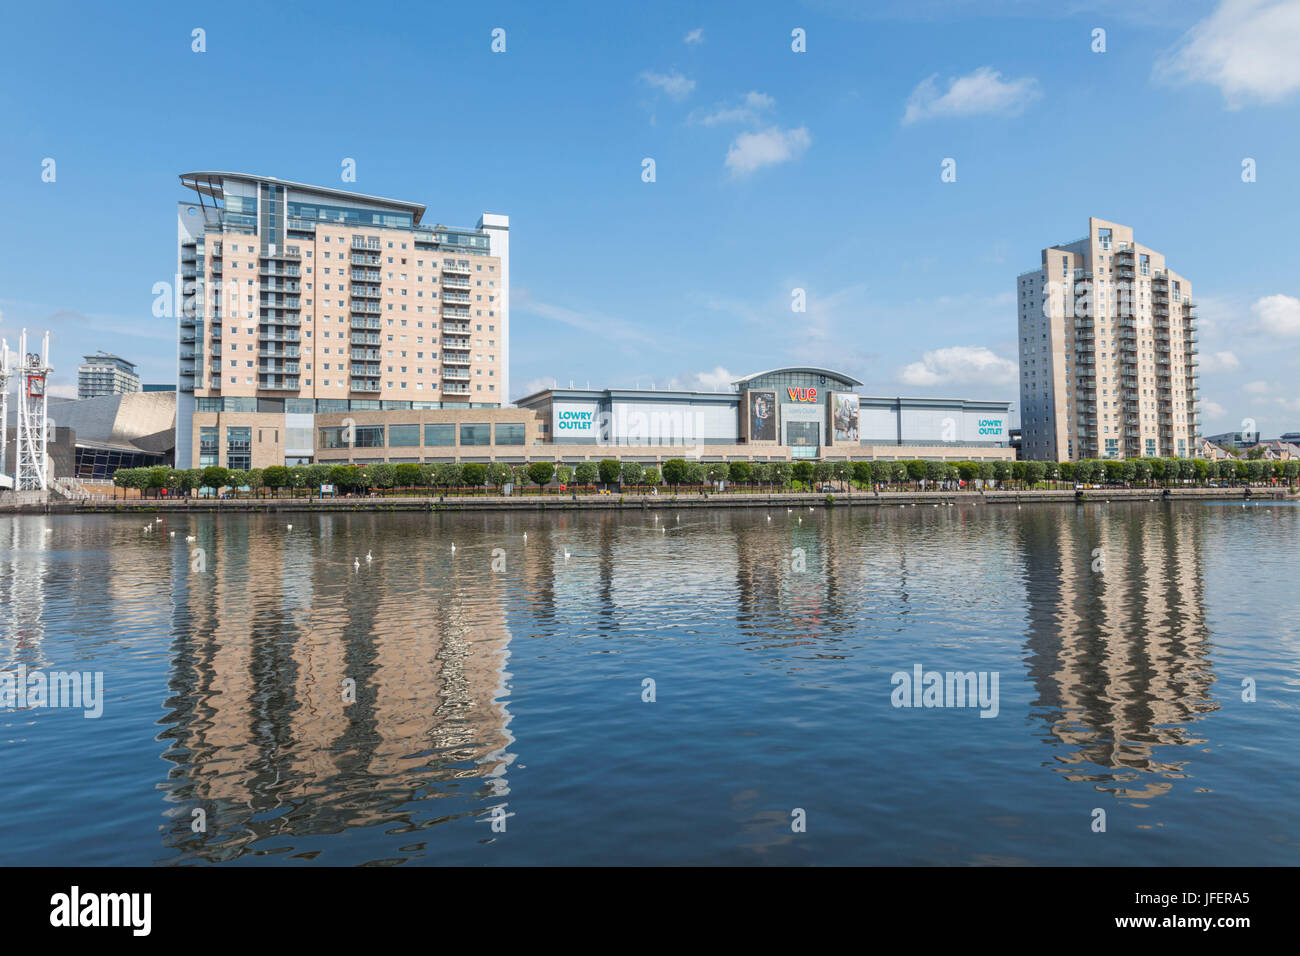 England, Manchester, Salford, The Quays, The Lowry Outlet Shopping Centre Stock Photo